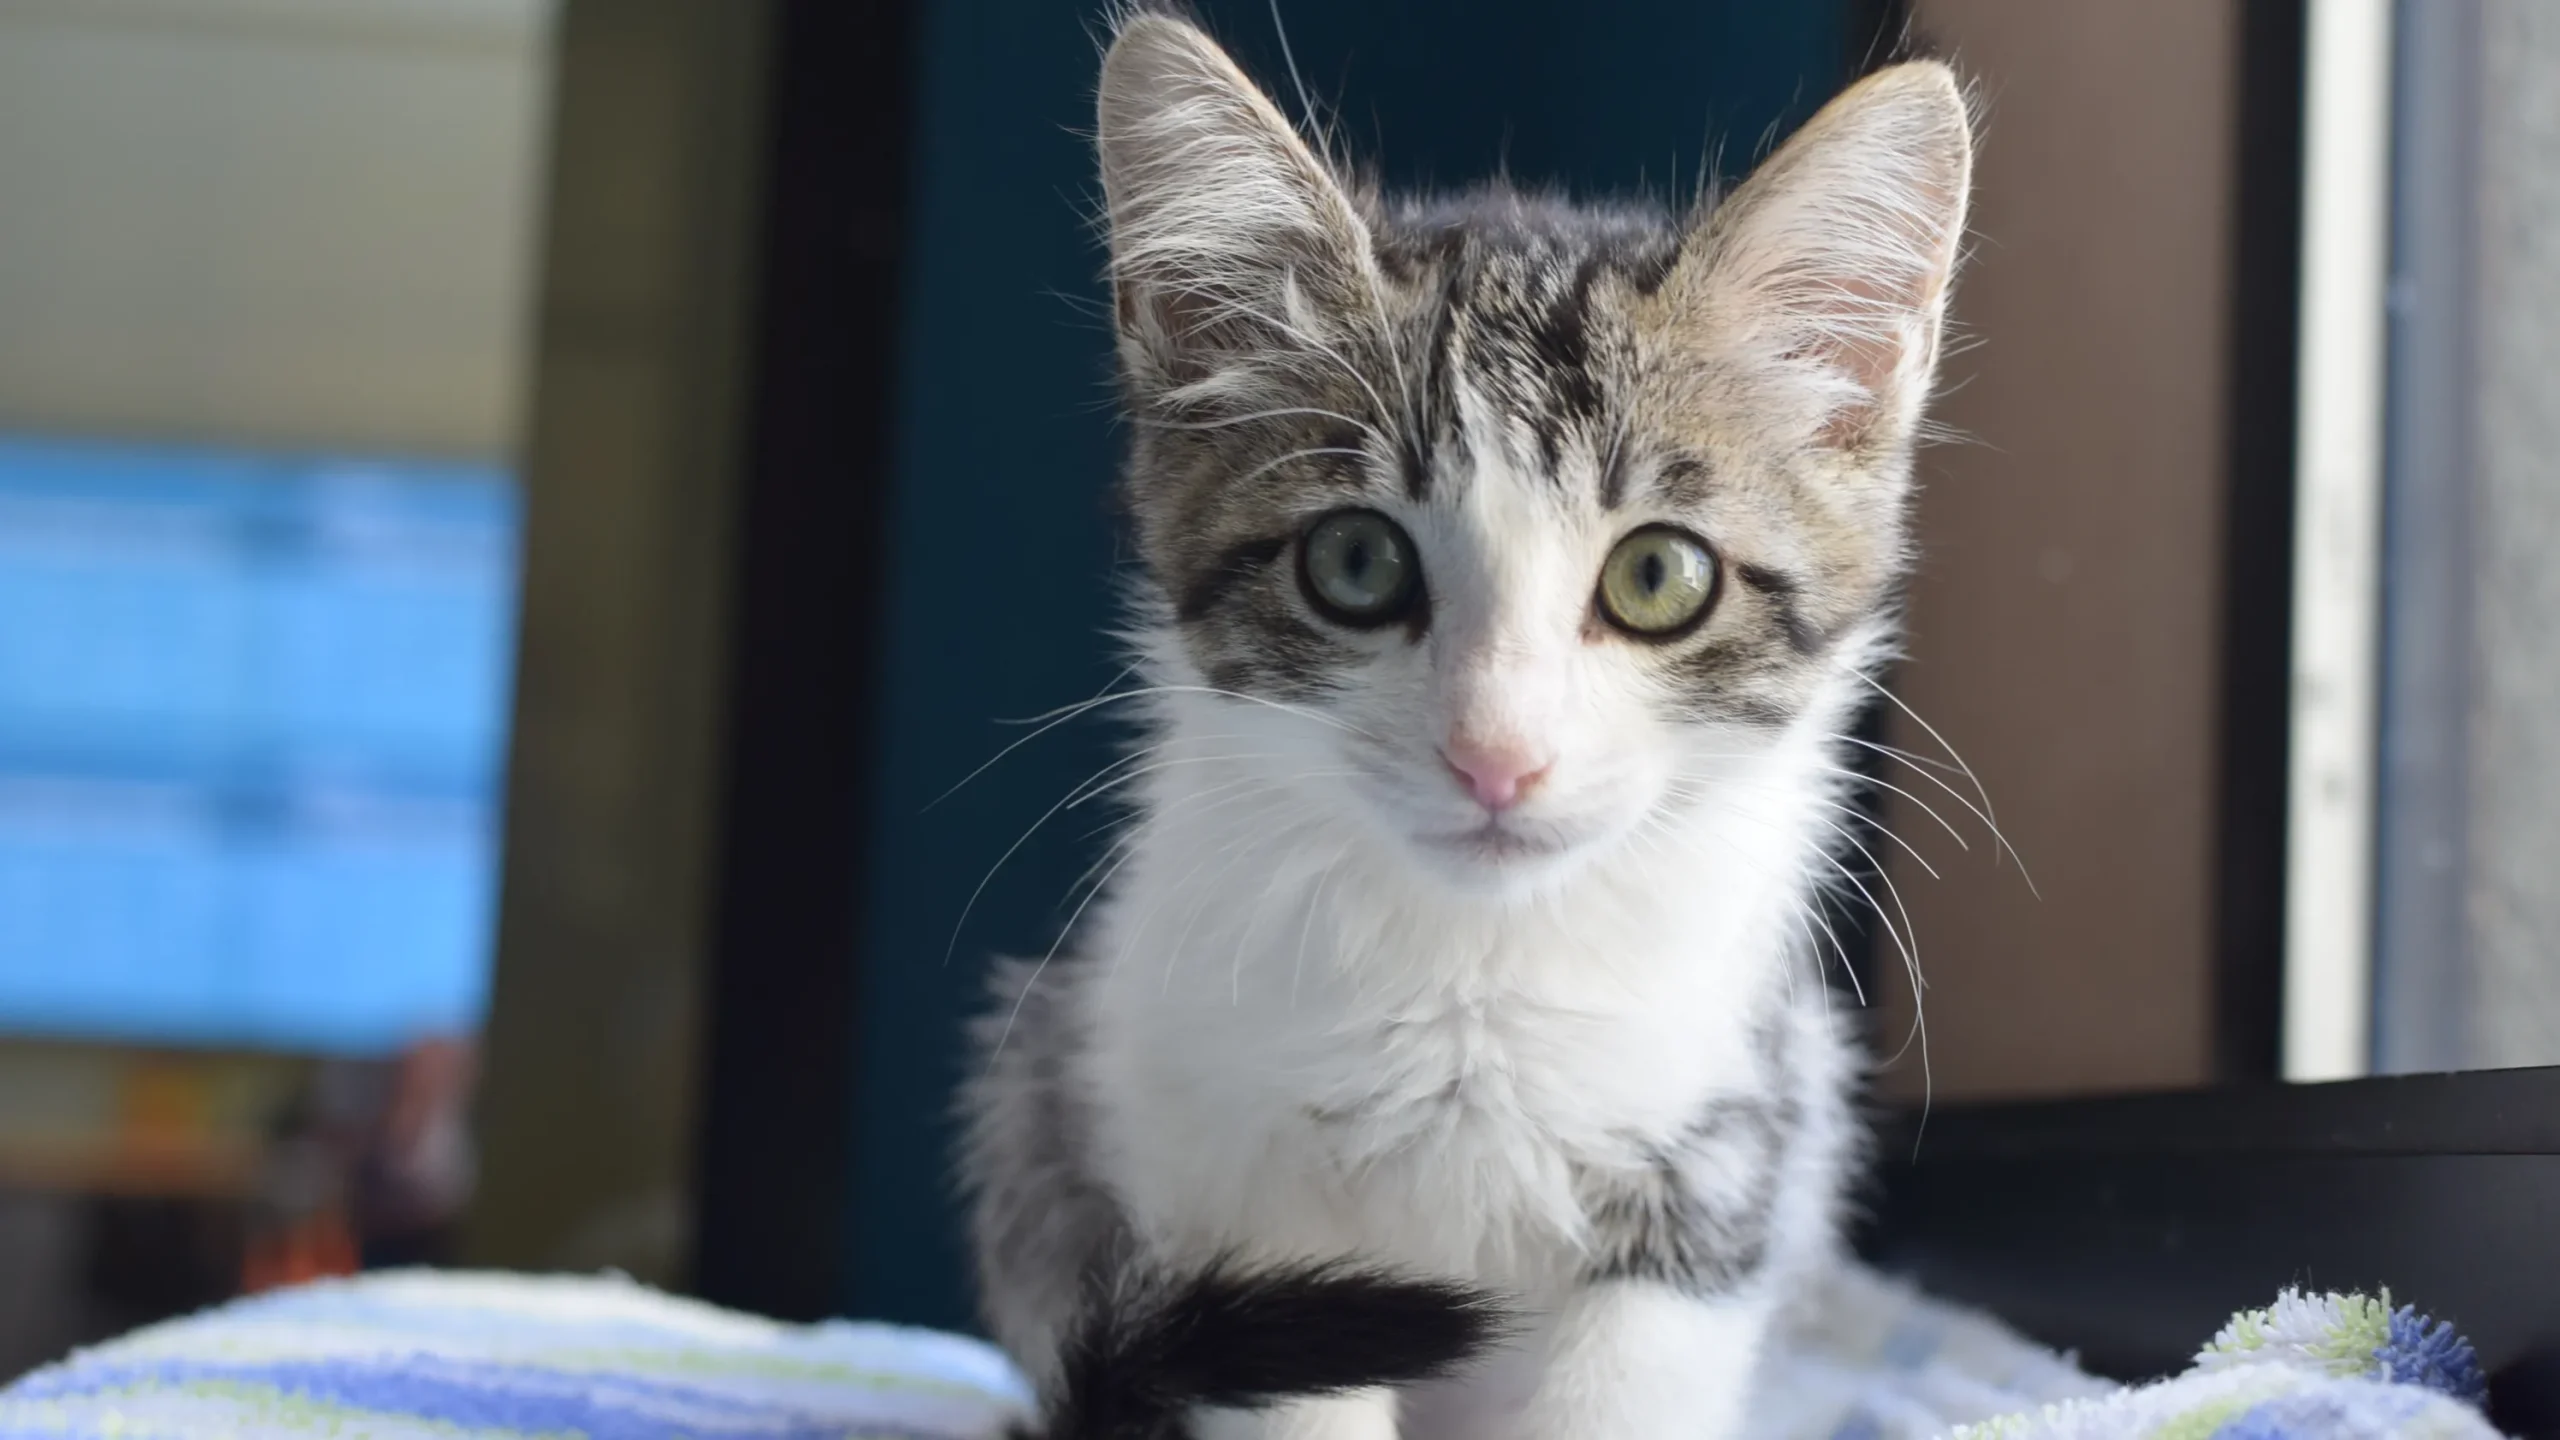 Oregon’s ‘Meow-Tragious’ Kitten Event Aims to Find Homes Fast!